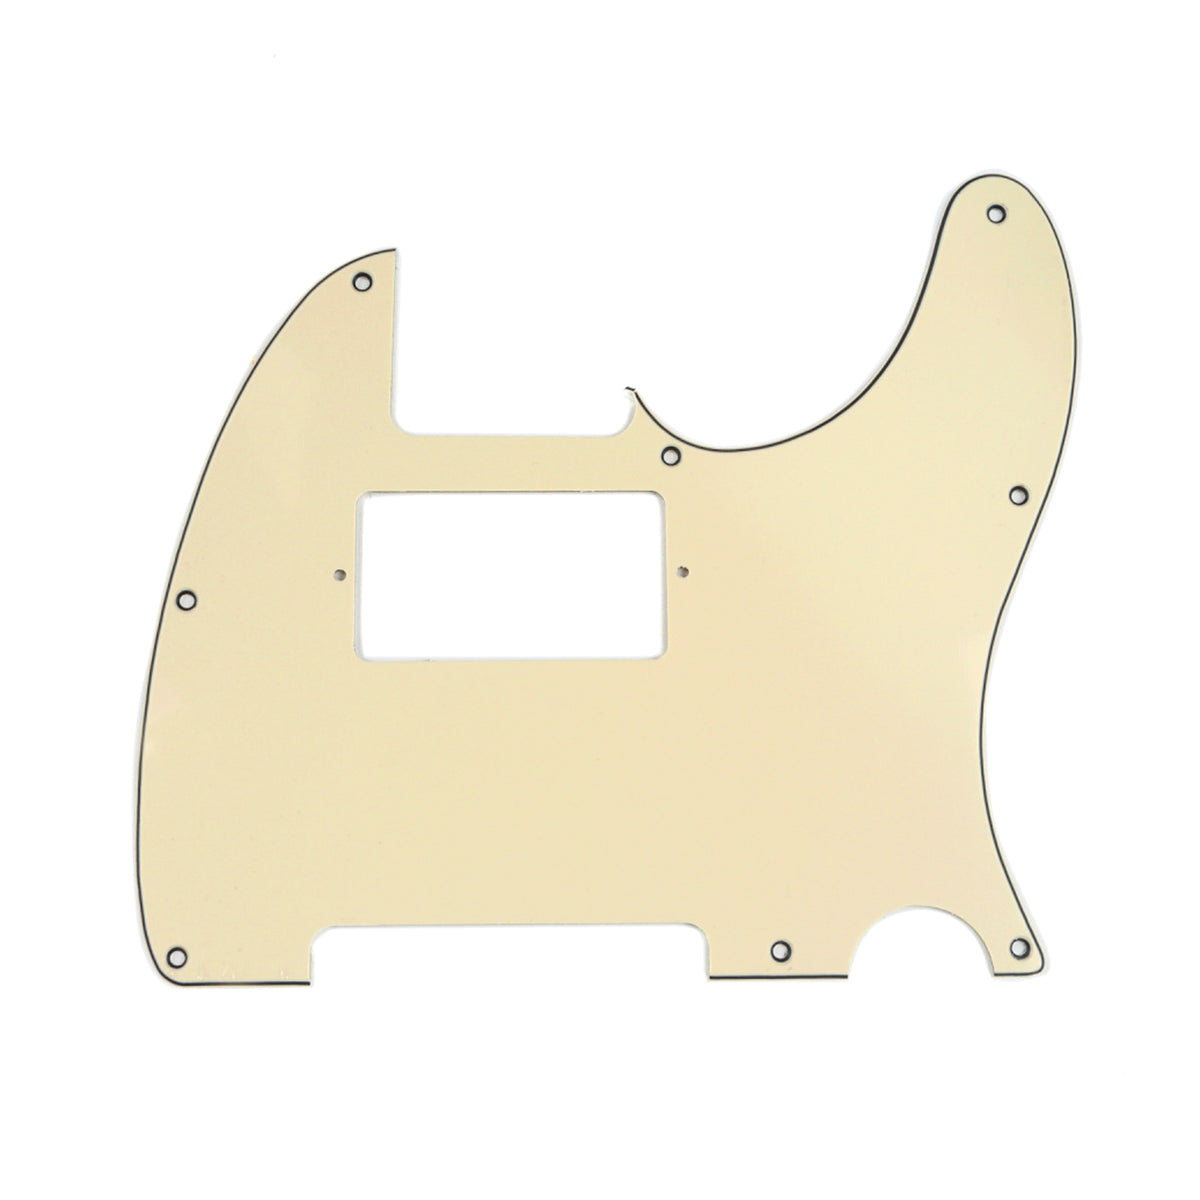 Musiclily 8 Hole Guitar Tele Pickguard Humbucker HH for USA/Mexican Made Fender Standard Telecaster Modern Style,3Ply Cream